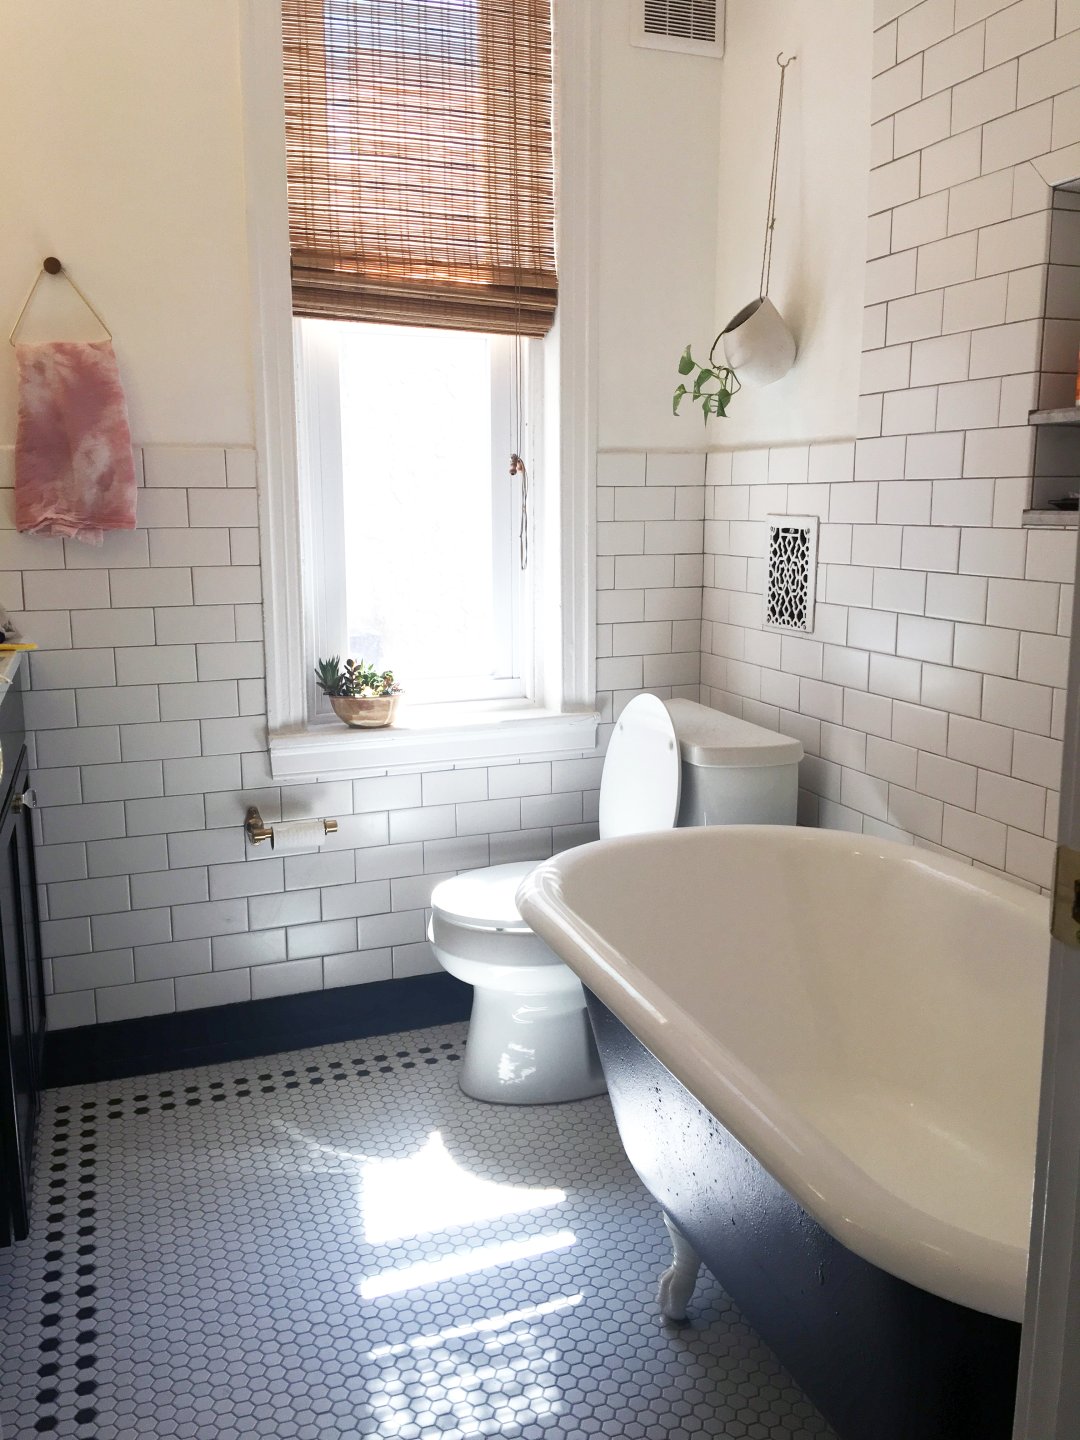 $20K Vintage Bathroom Remodel: Budget, Sources + More | Apartment Therapy